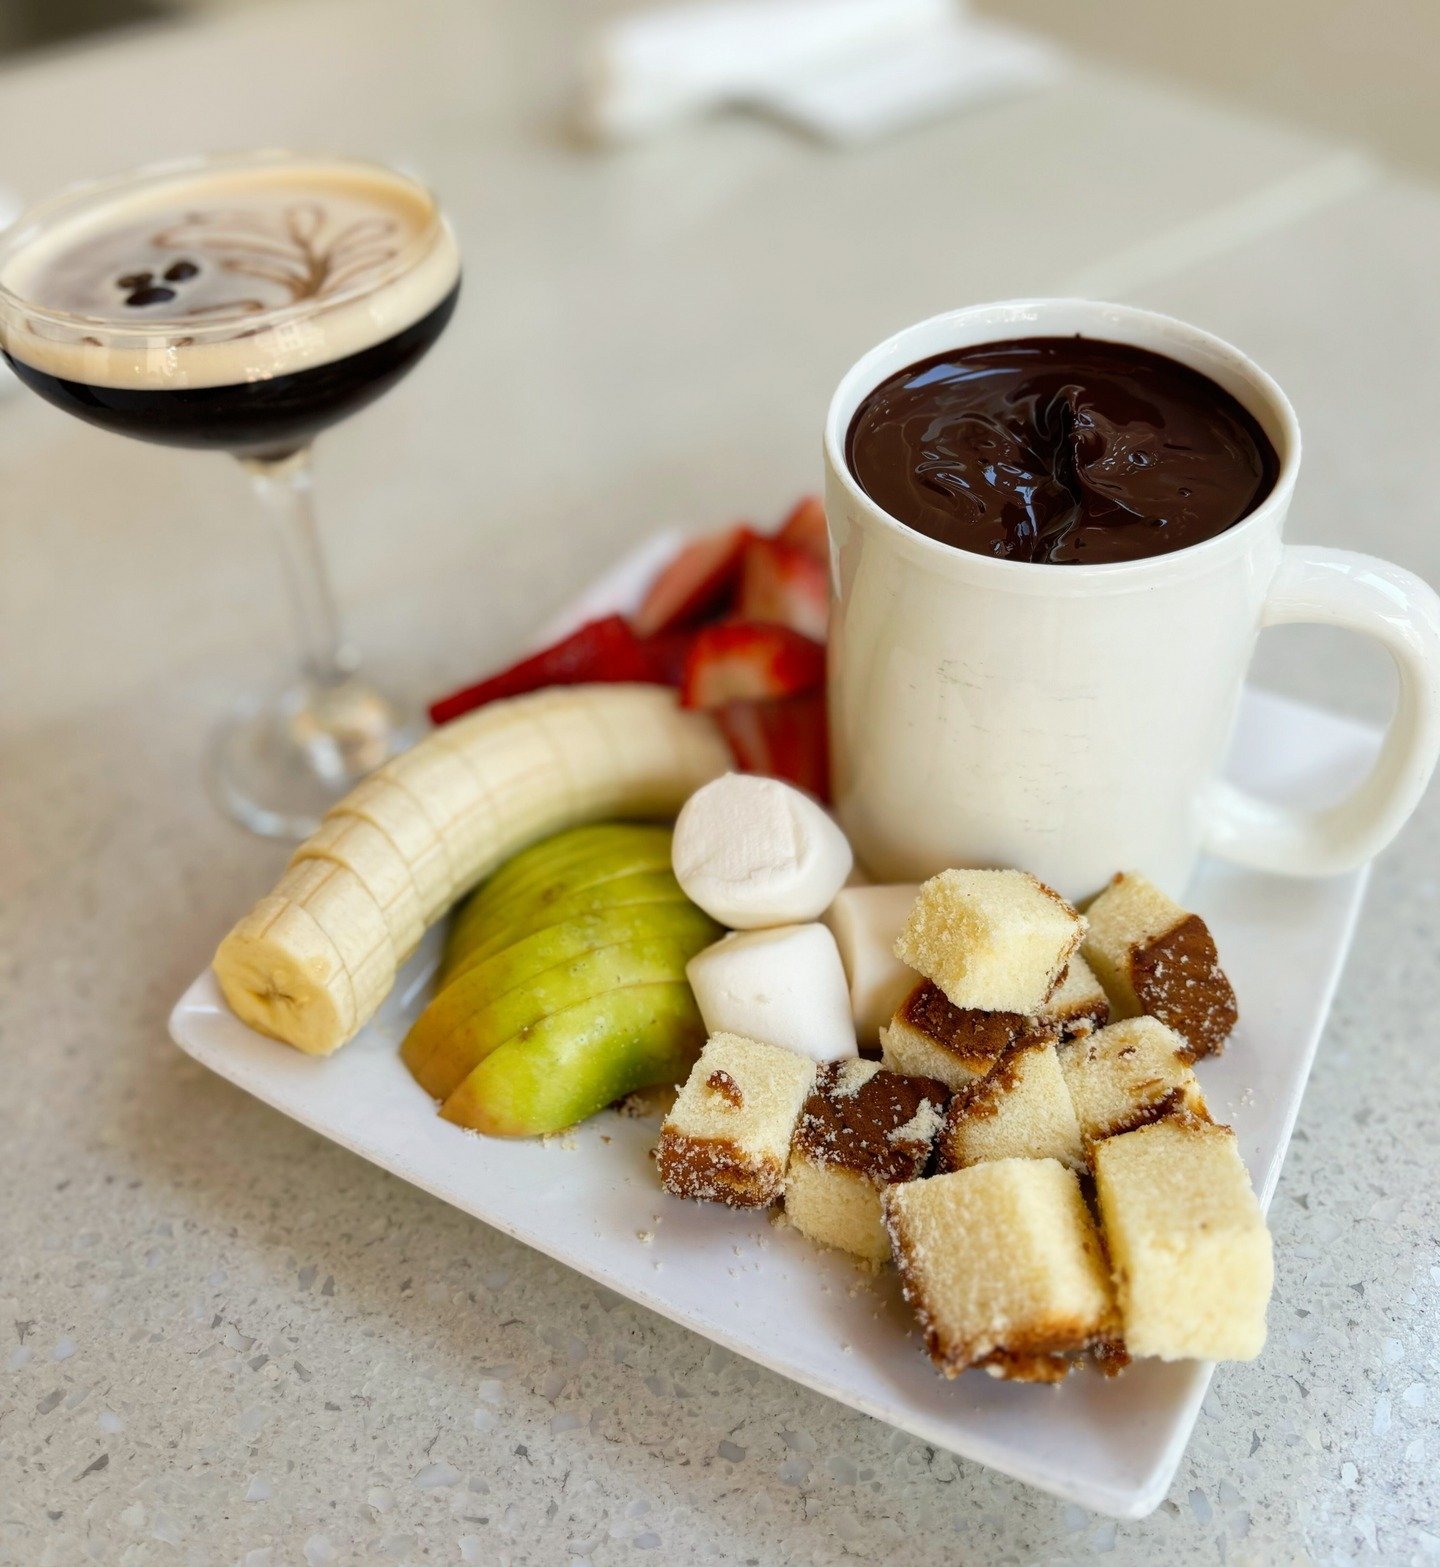 Your mom called. She wants our Chocolate Fondue + Espresso Martini for Mother's Day. Don't let her down!😉